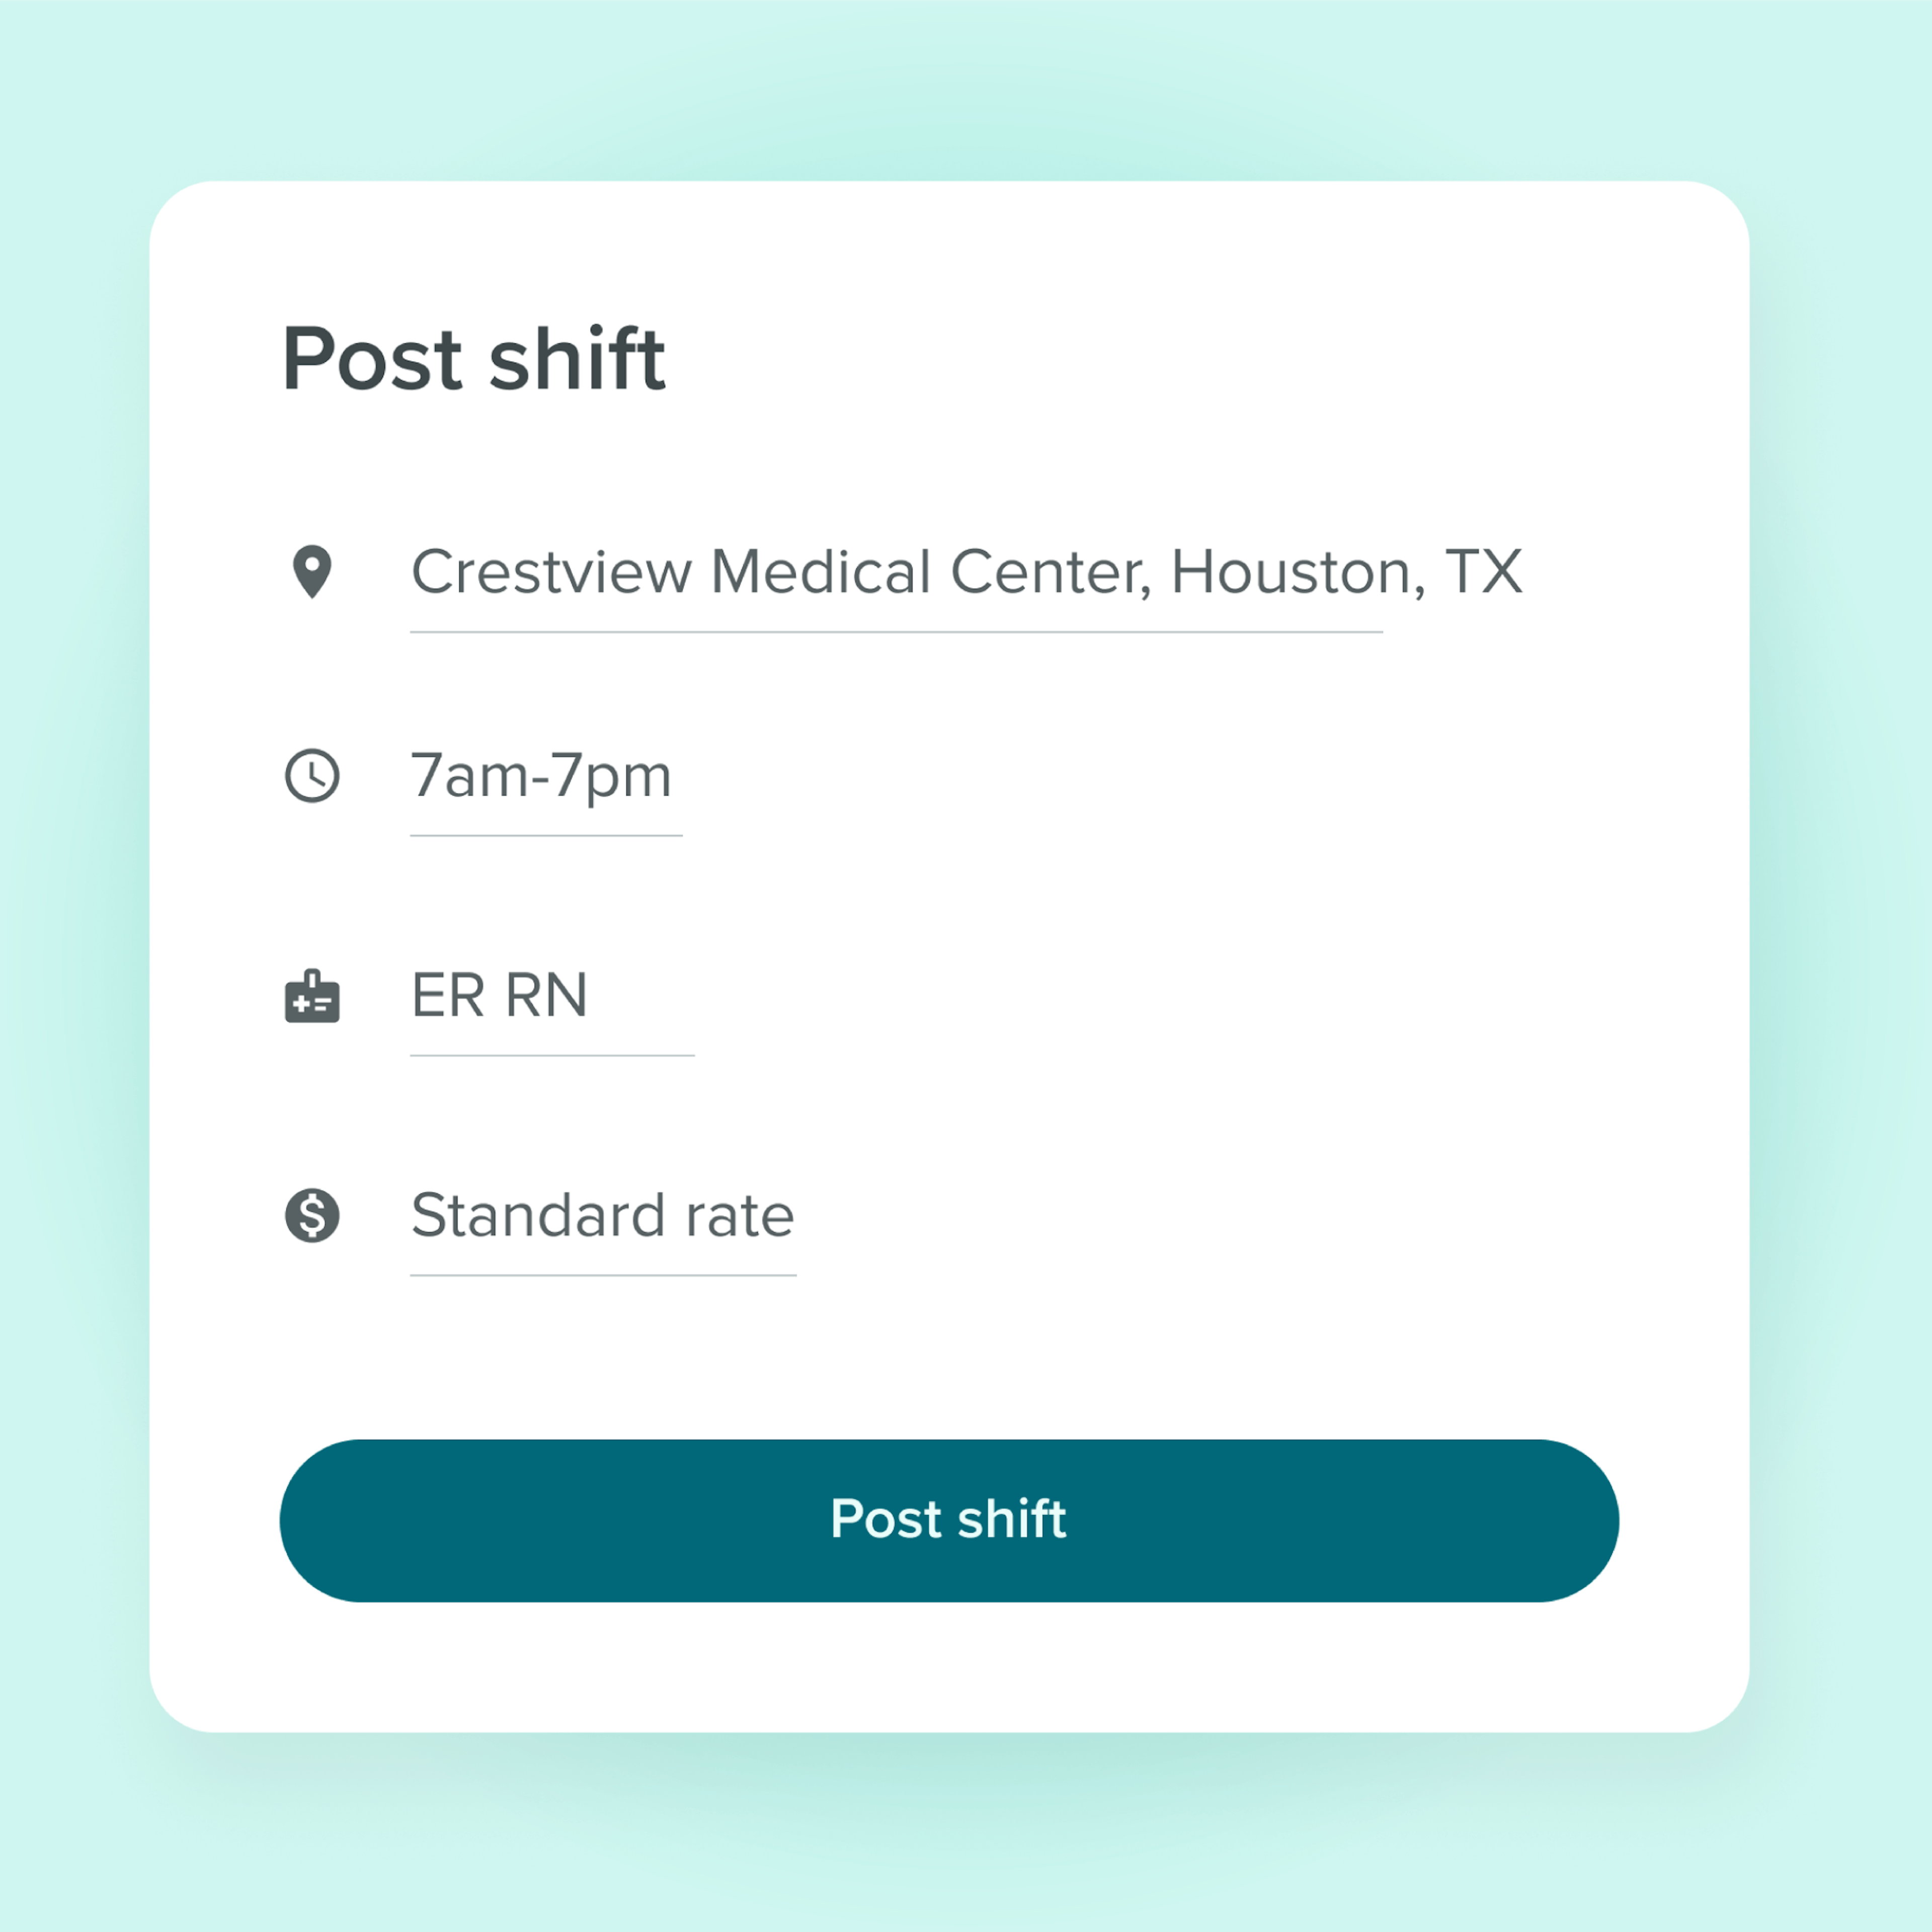 Post shift UI from Medely